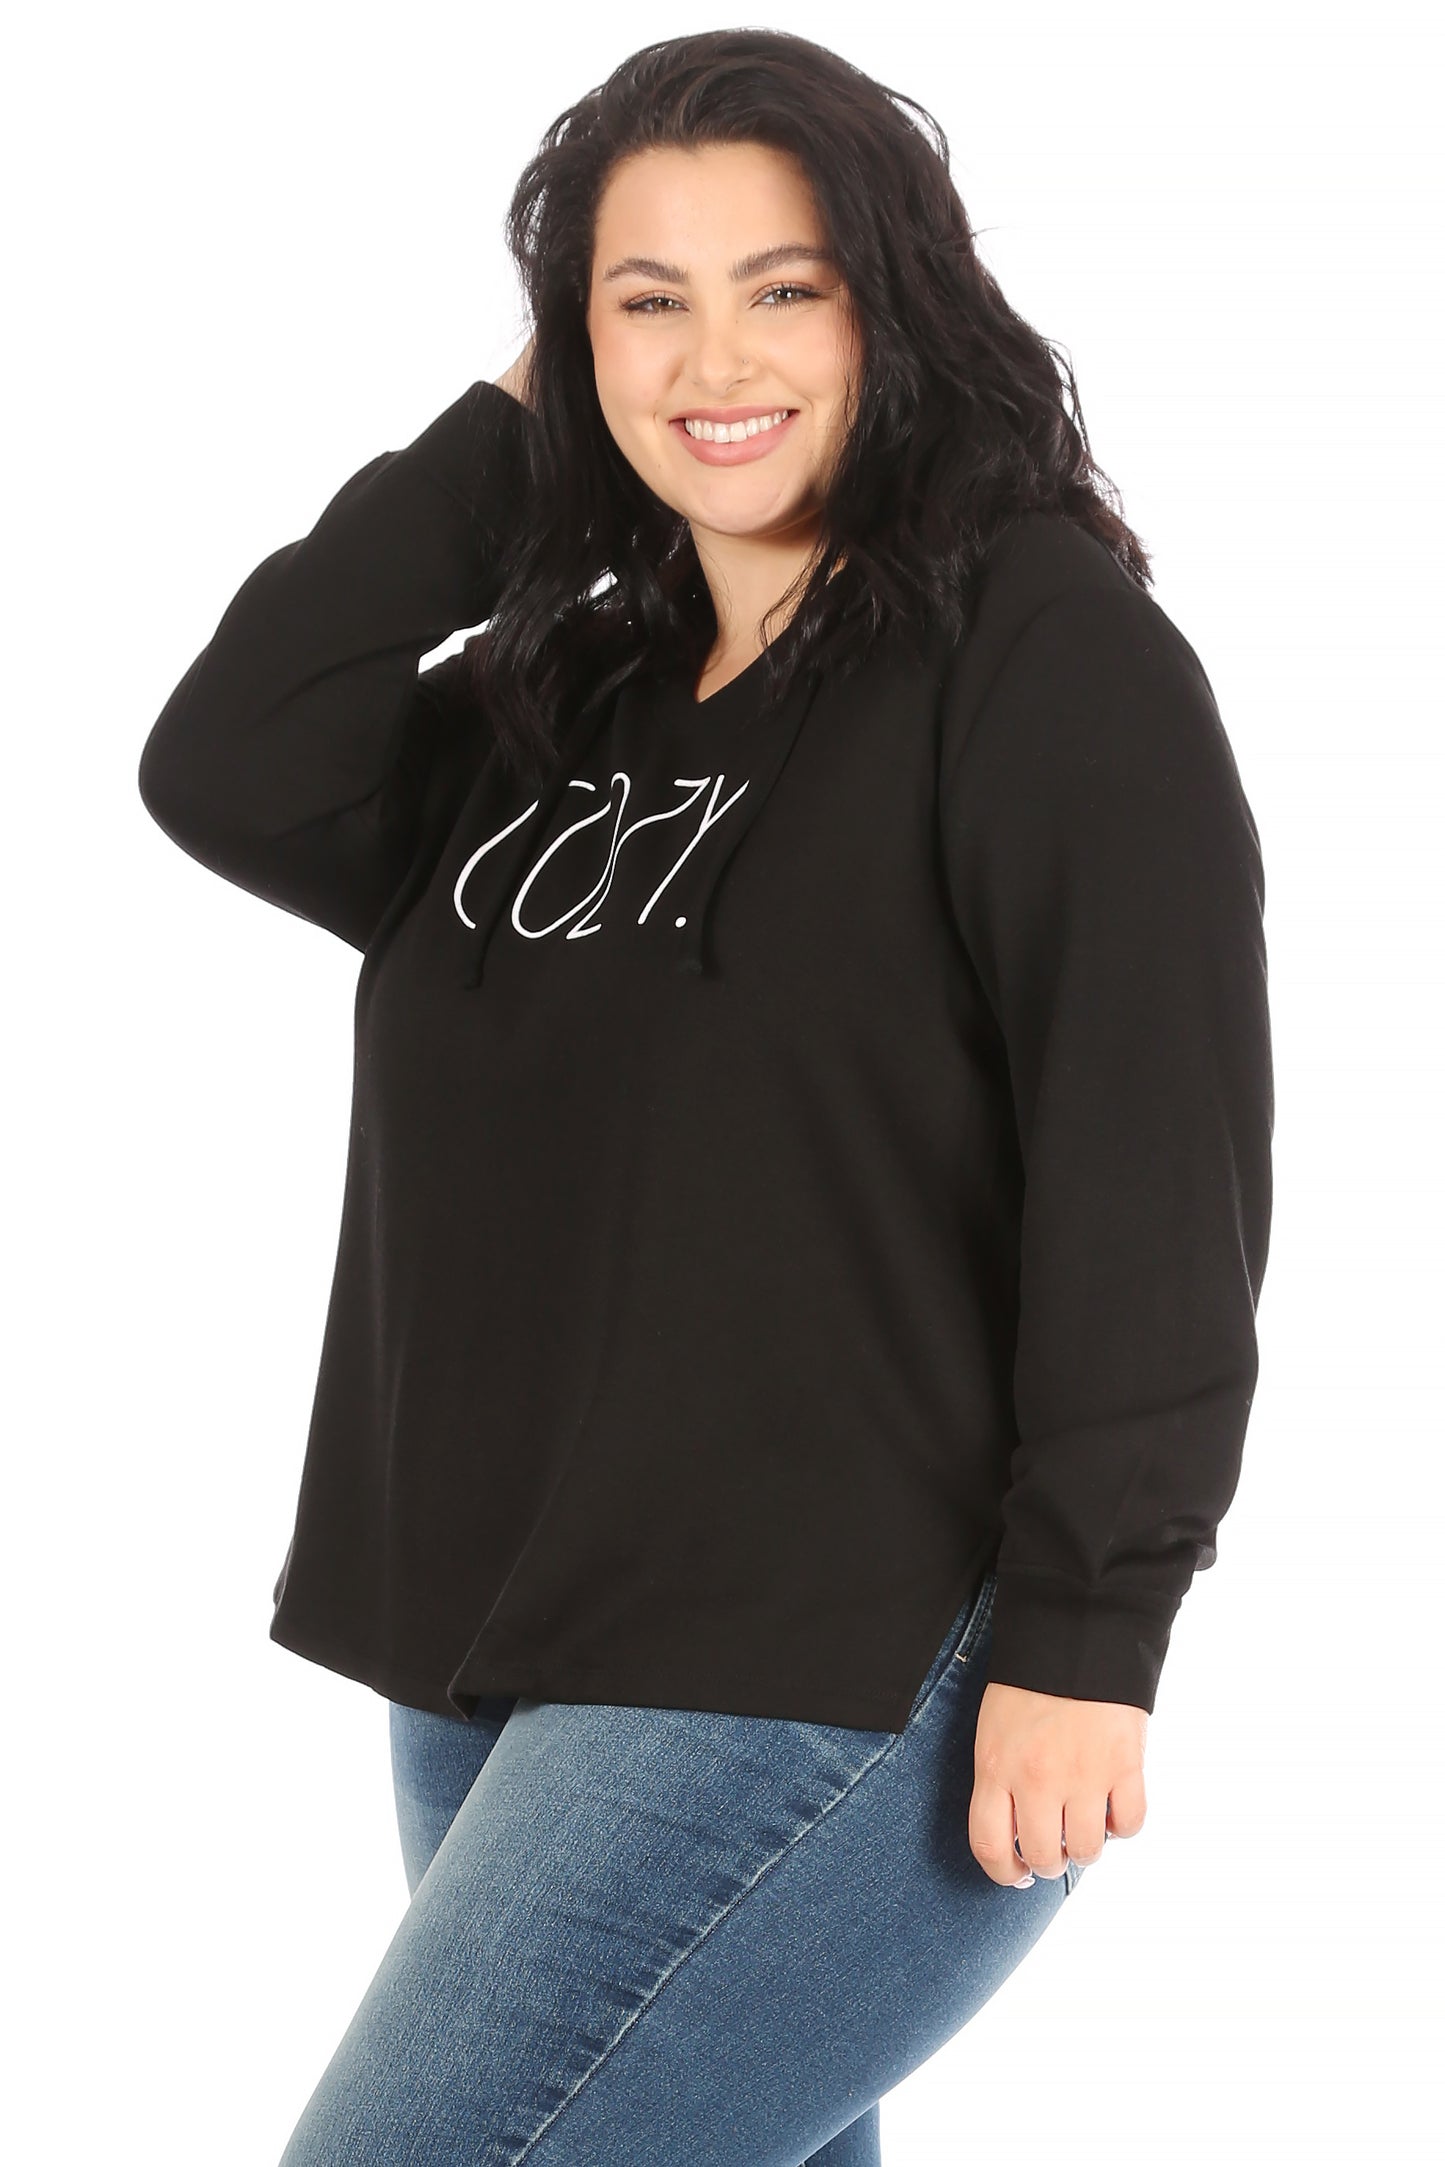 Rae Dunn Women's BE HAPPY Hoodie and Drawstring Jogger Lounge